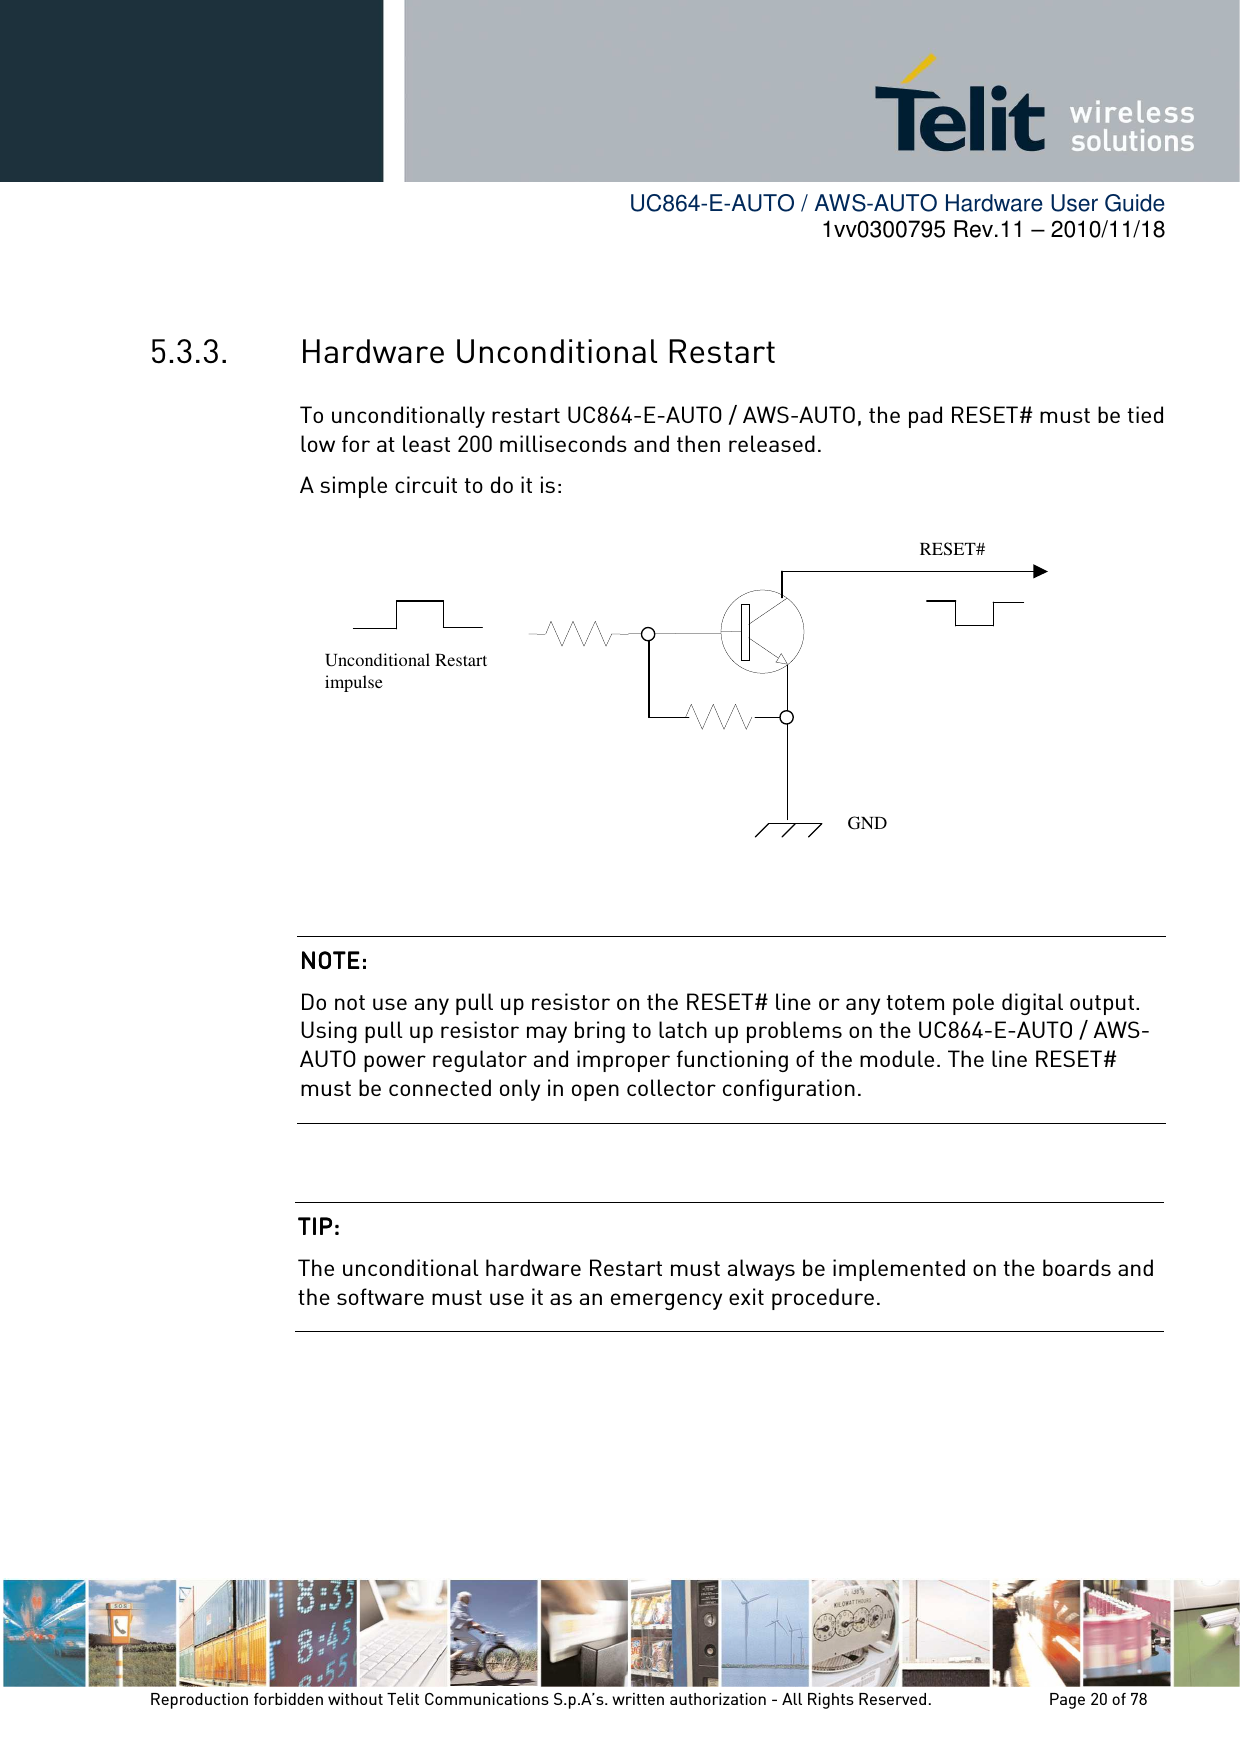        UC864-E-AUTO / AWS-AUTO Hardware User Guide 1vv0300795 Rev.11 – 2010/11/18     Reproduction forbidden without Telit Communications S.p.A’s. written authorization - All Rights Reserved.    Page 20 of 78   5.3.3. Hardware Unconditional Restart To unconditionally restart UC864-E-AUTO / AWS-AUTO, the pad RESET# must be tied low for at least 200 milliseconds and then released. A simple circuit to do it is:               NOTE: NOTE: NOTE: NOTE:     Do not use any pull up resistor on the RESET# line or any totem pole digital output. Using pull up resistor may bring to latch up problems on the UC864-E-AUTO / AWS-AUTO power regulator and improper functioning of the module. The line RESET# must be connected only in open collector configuration. TIP: TIP: TIP: TIP:     The unconditional hardware Restart must always be implemented on the boards and the software must use it as an emergency exit procedure.    RESET# Unconditional Restart impulse   GND 